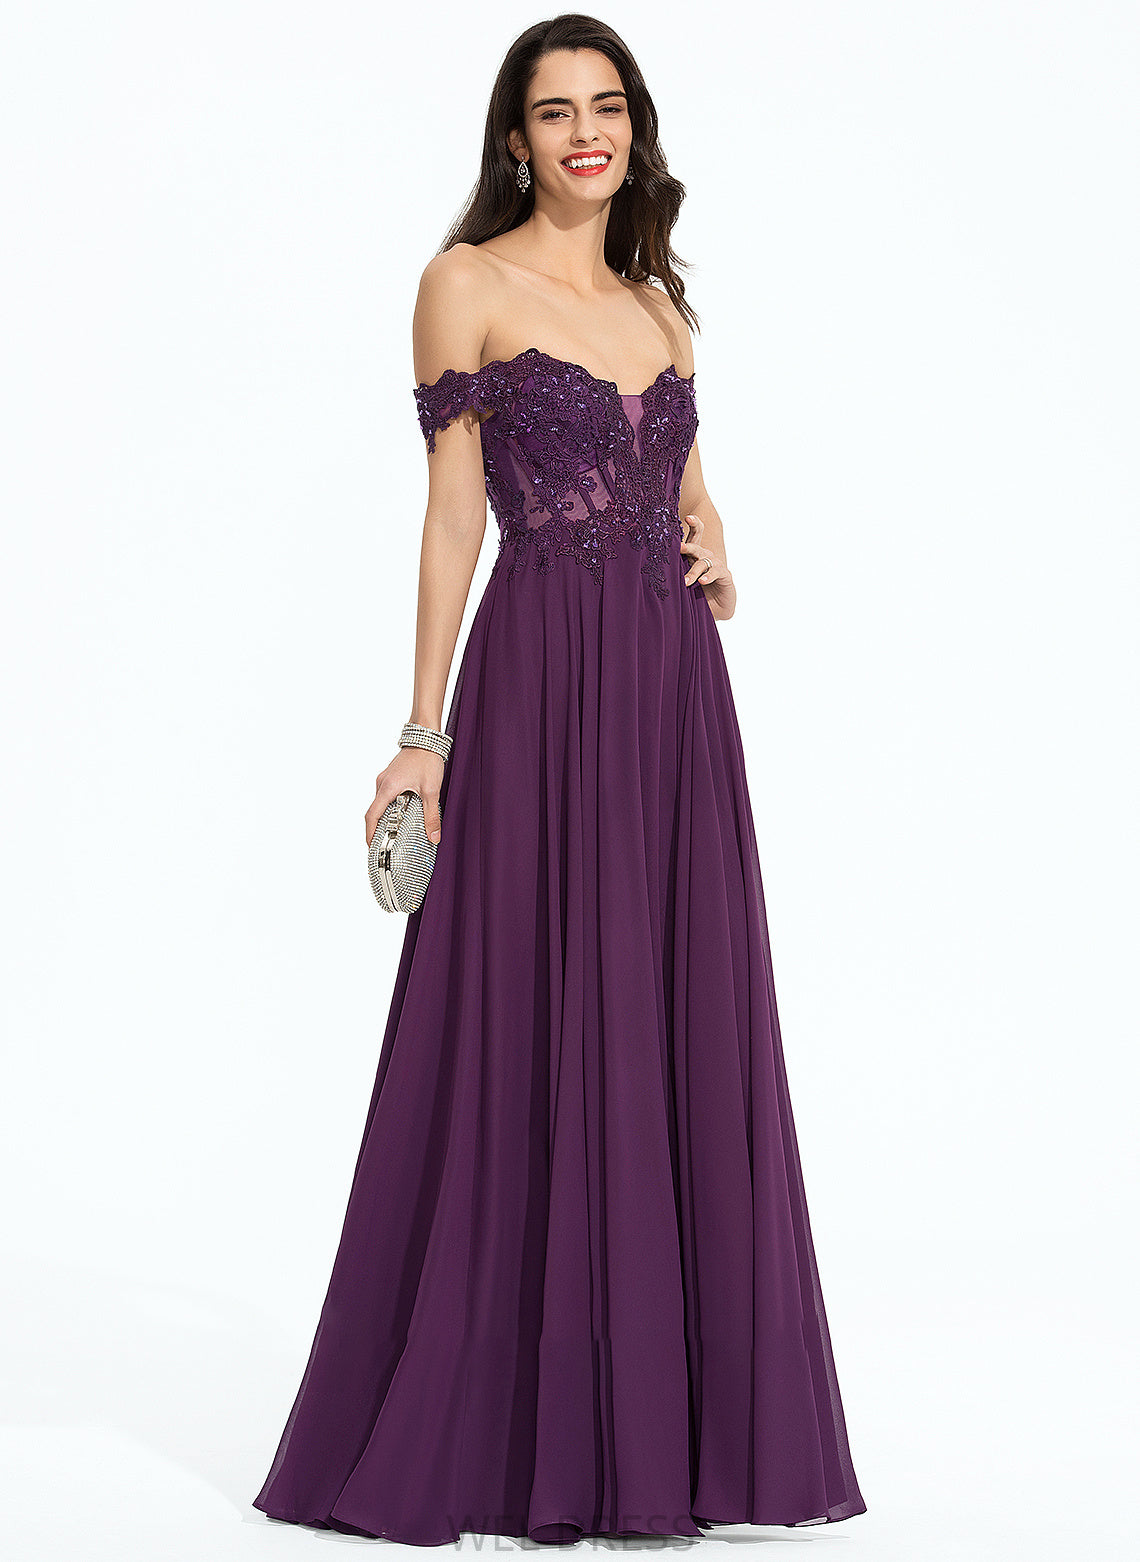 Ball-Gown/Princess Floor-Length Off-the-Shoulder With Lauren Prom Dresses Beading Sequins Chiffon